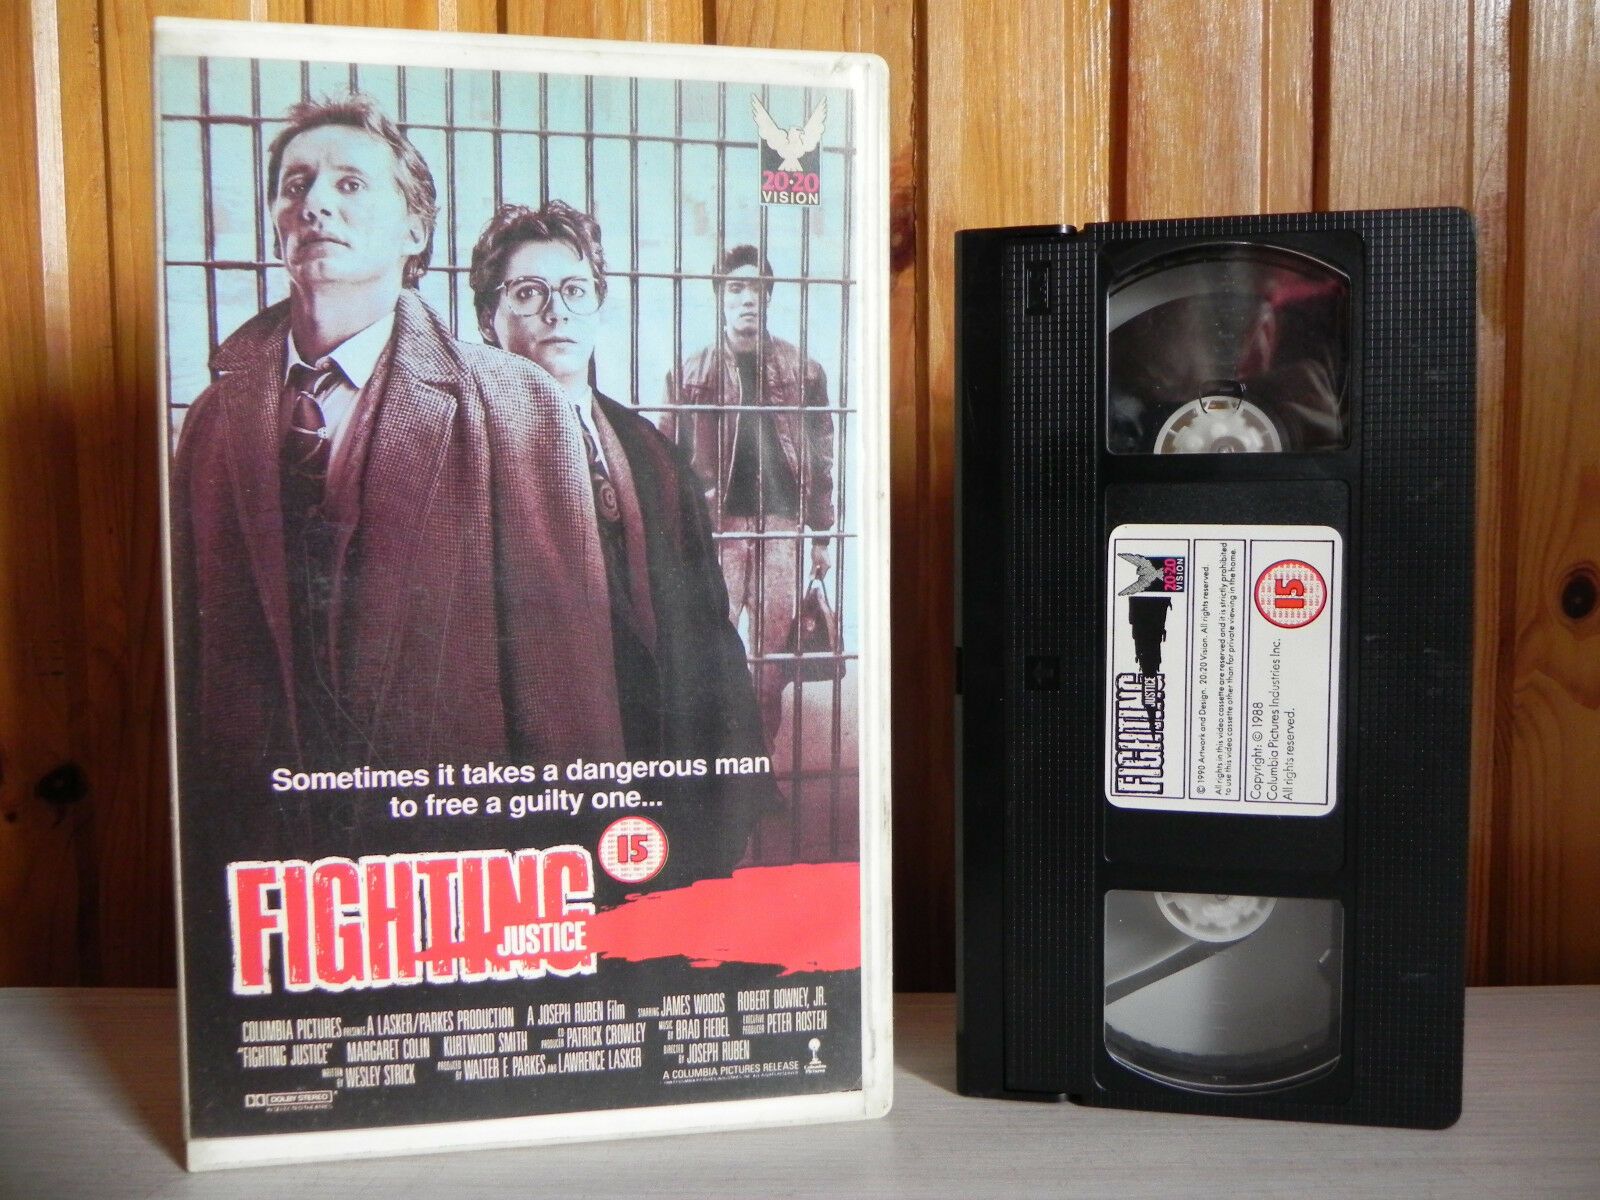 Fighting Justice - New York China Town - Crime Thriller - 20/20 Big Video - VHS-